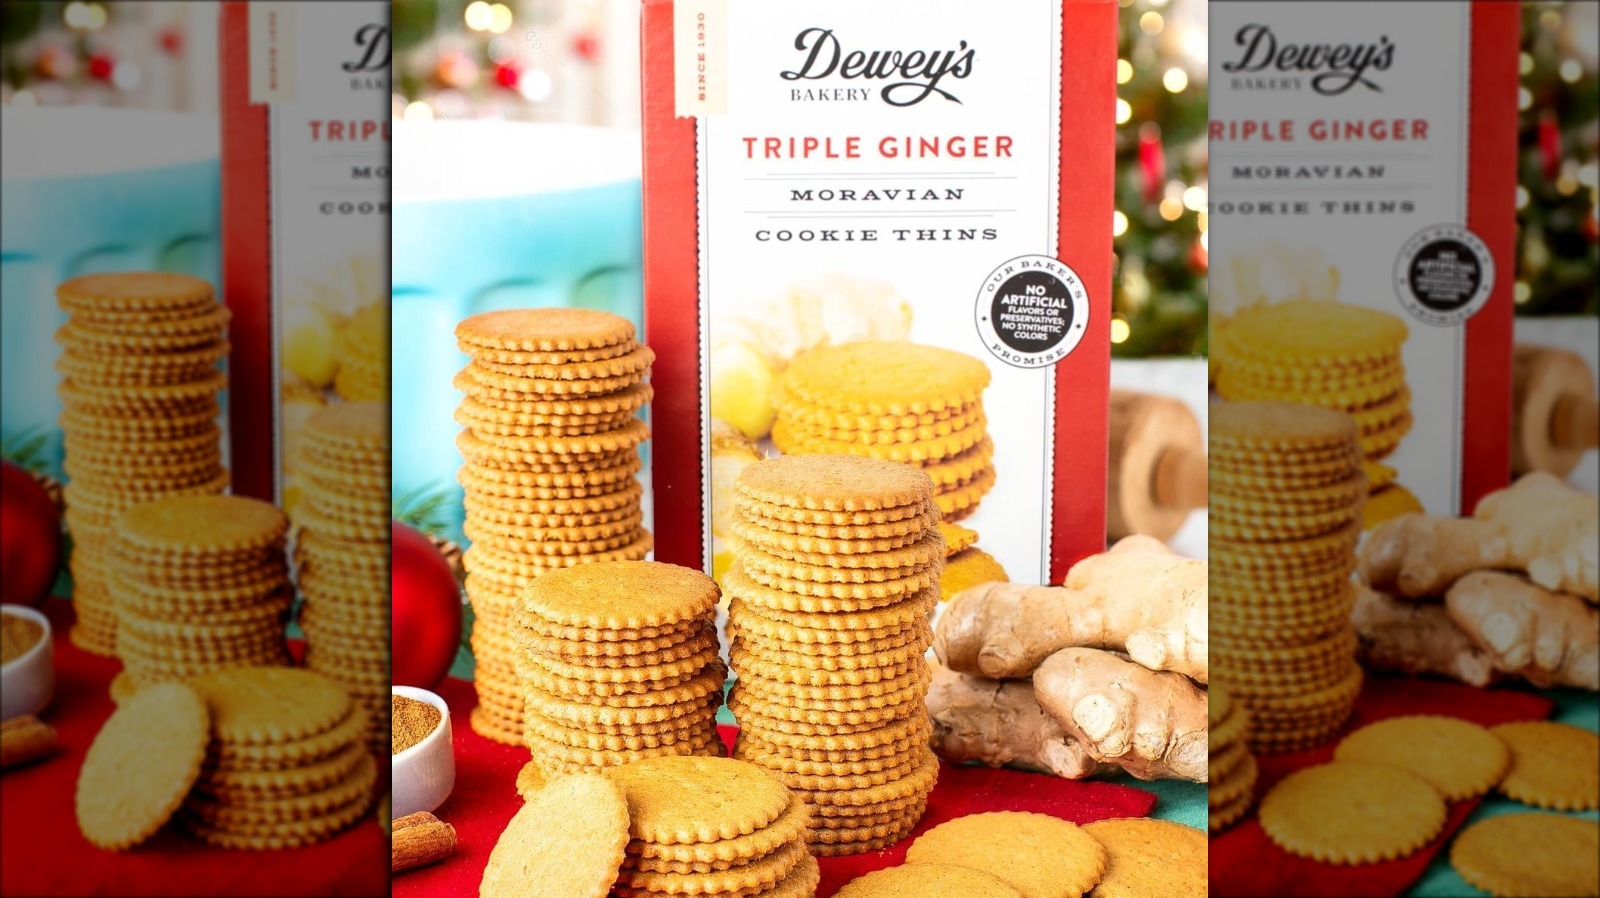 Costco Fans Can T Wait To Try These Spicy Ginger Cookies